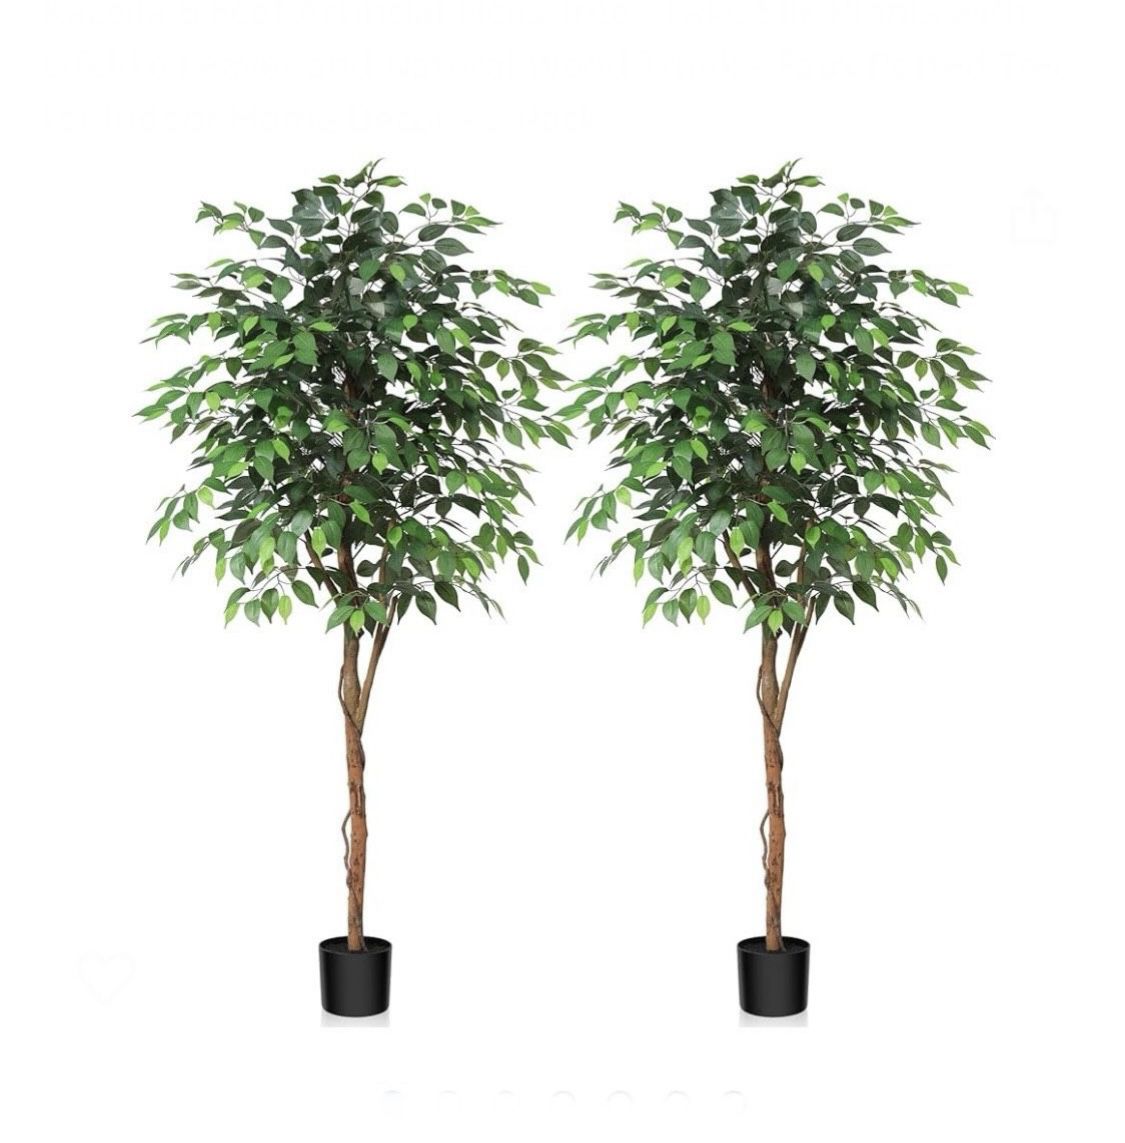 Kazeila 6 Feet Artificial Ficus Tree - Fake Silk Plants with Lifelike Leaves and Natural Wood Trunk - Faux Potted Tree for Indoor Home Decor - 2 Pack